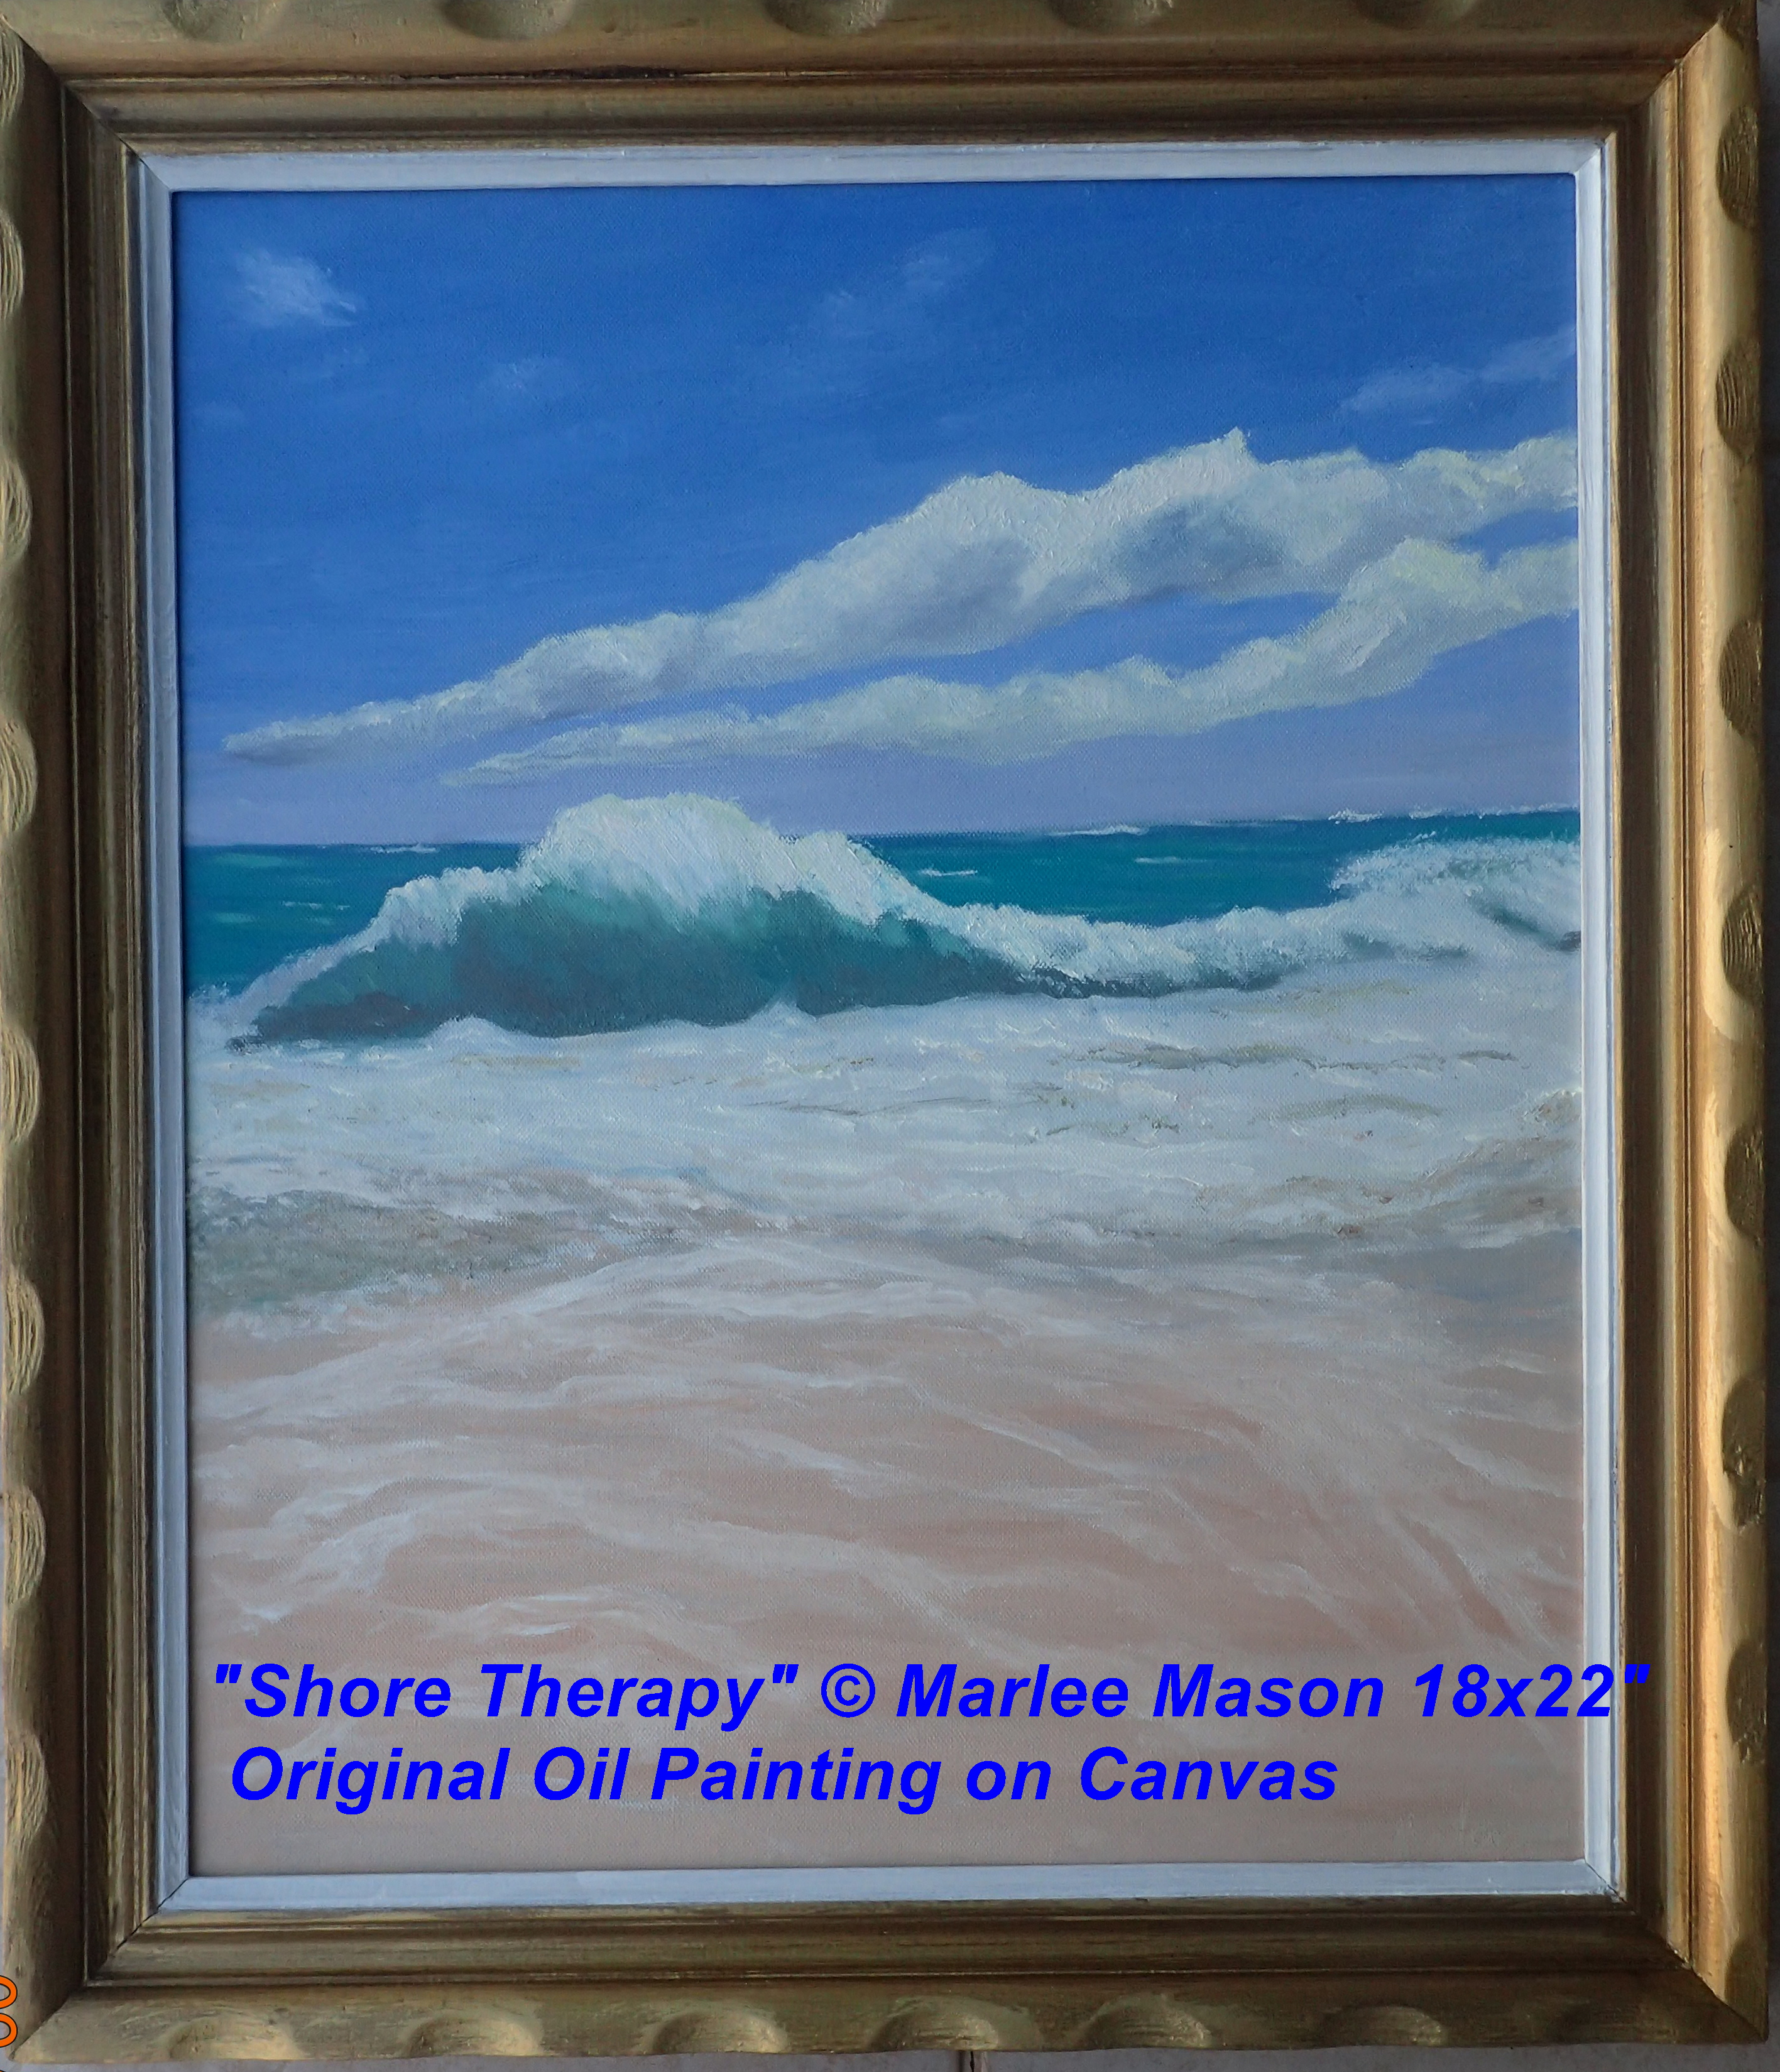 Original Oil on Canvas 18"x22" © Marlee Mason        2020 has been a year of non stop effort in recovery from 2019 Hurricane Dorian.  As a mental health break we need some time at the shore,  just to